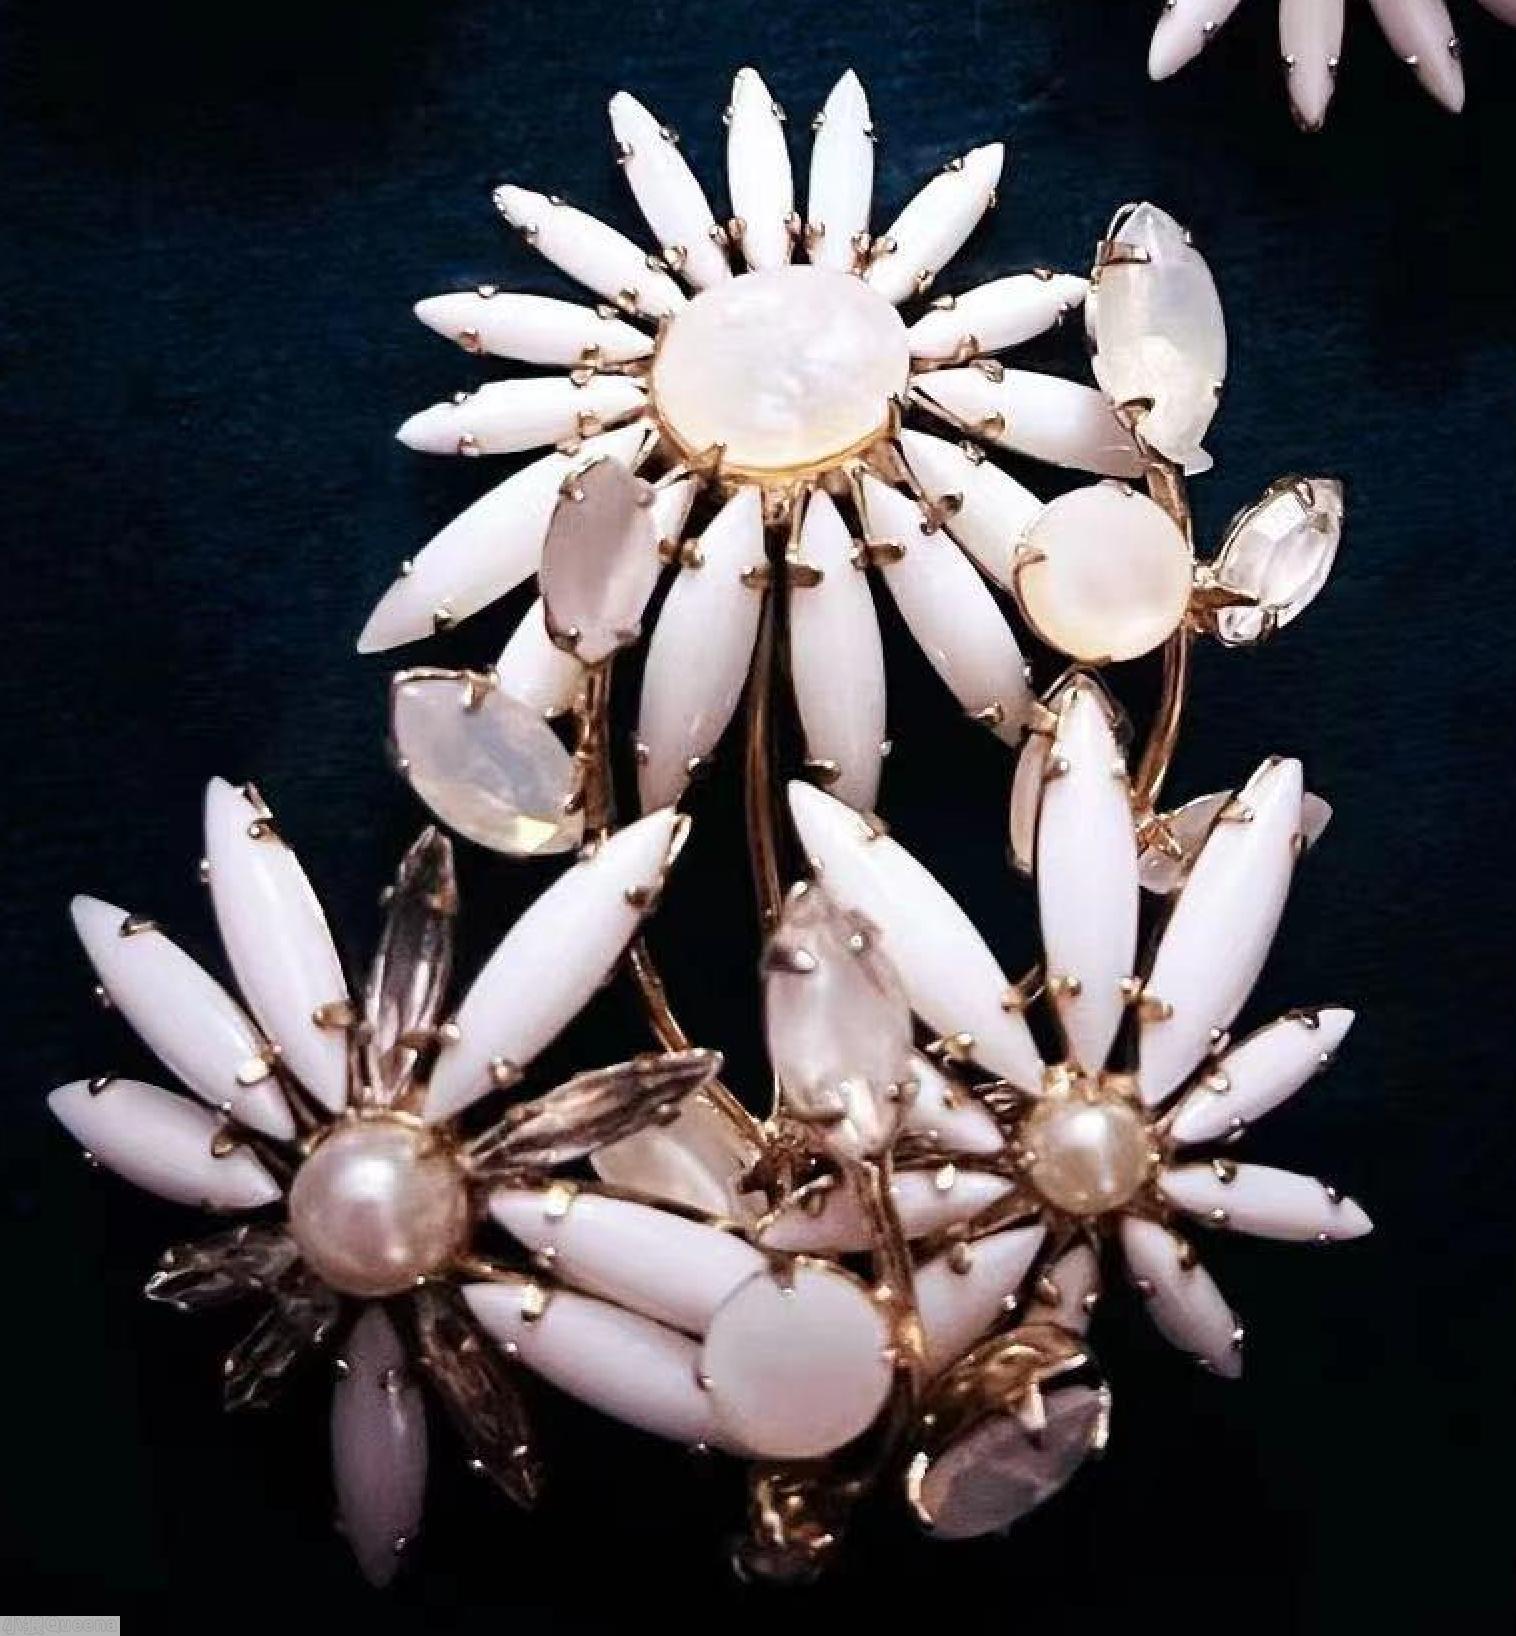 Schreiner 3 black eye daisy flower pin milk white navette moon glow white large oval cab center faux pearl center crystal navette goldtone jewelry